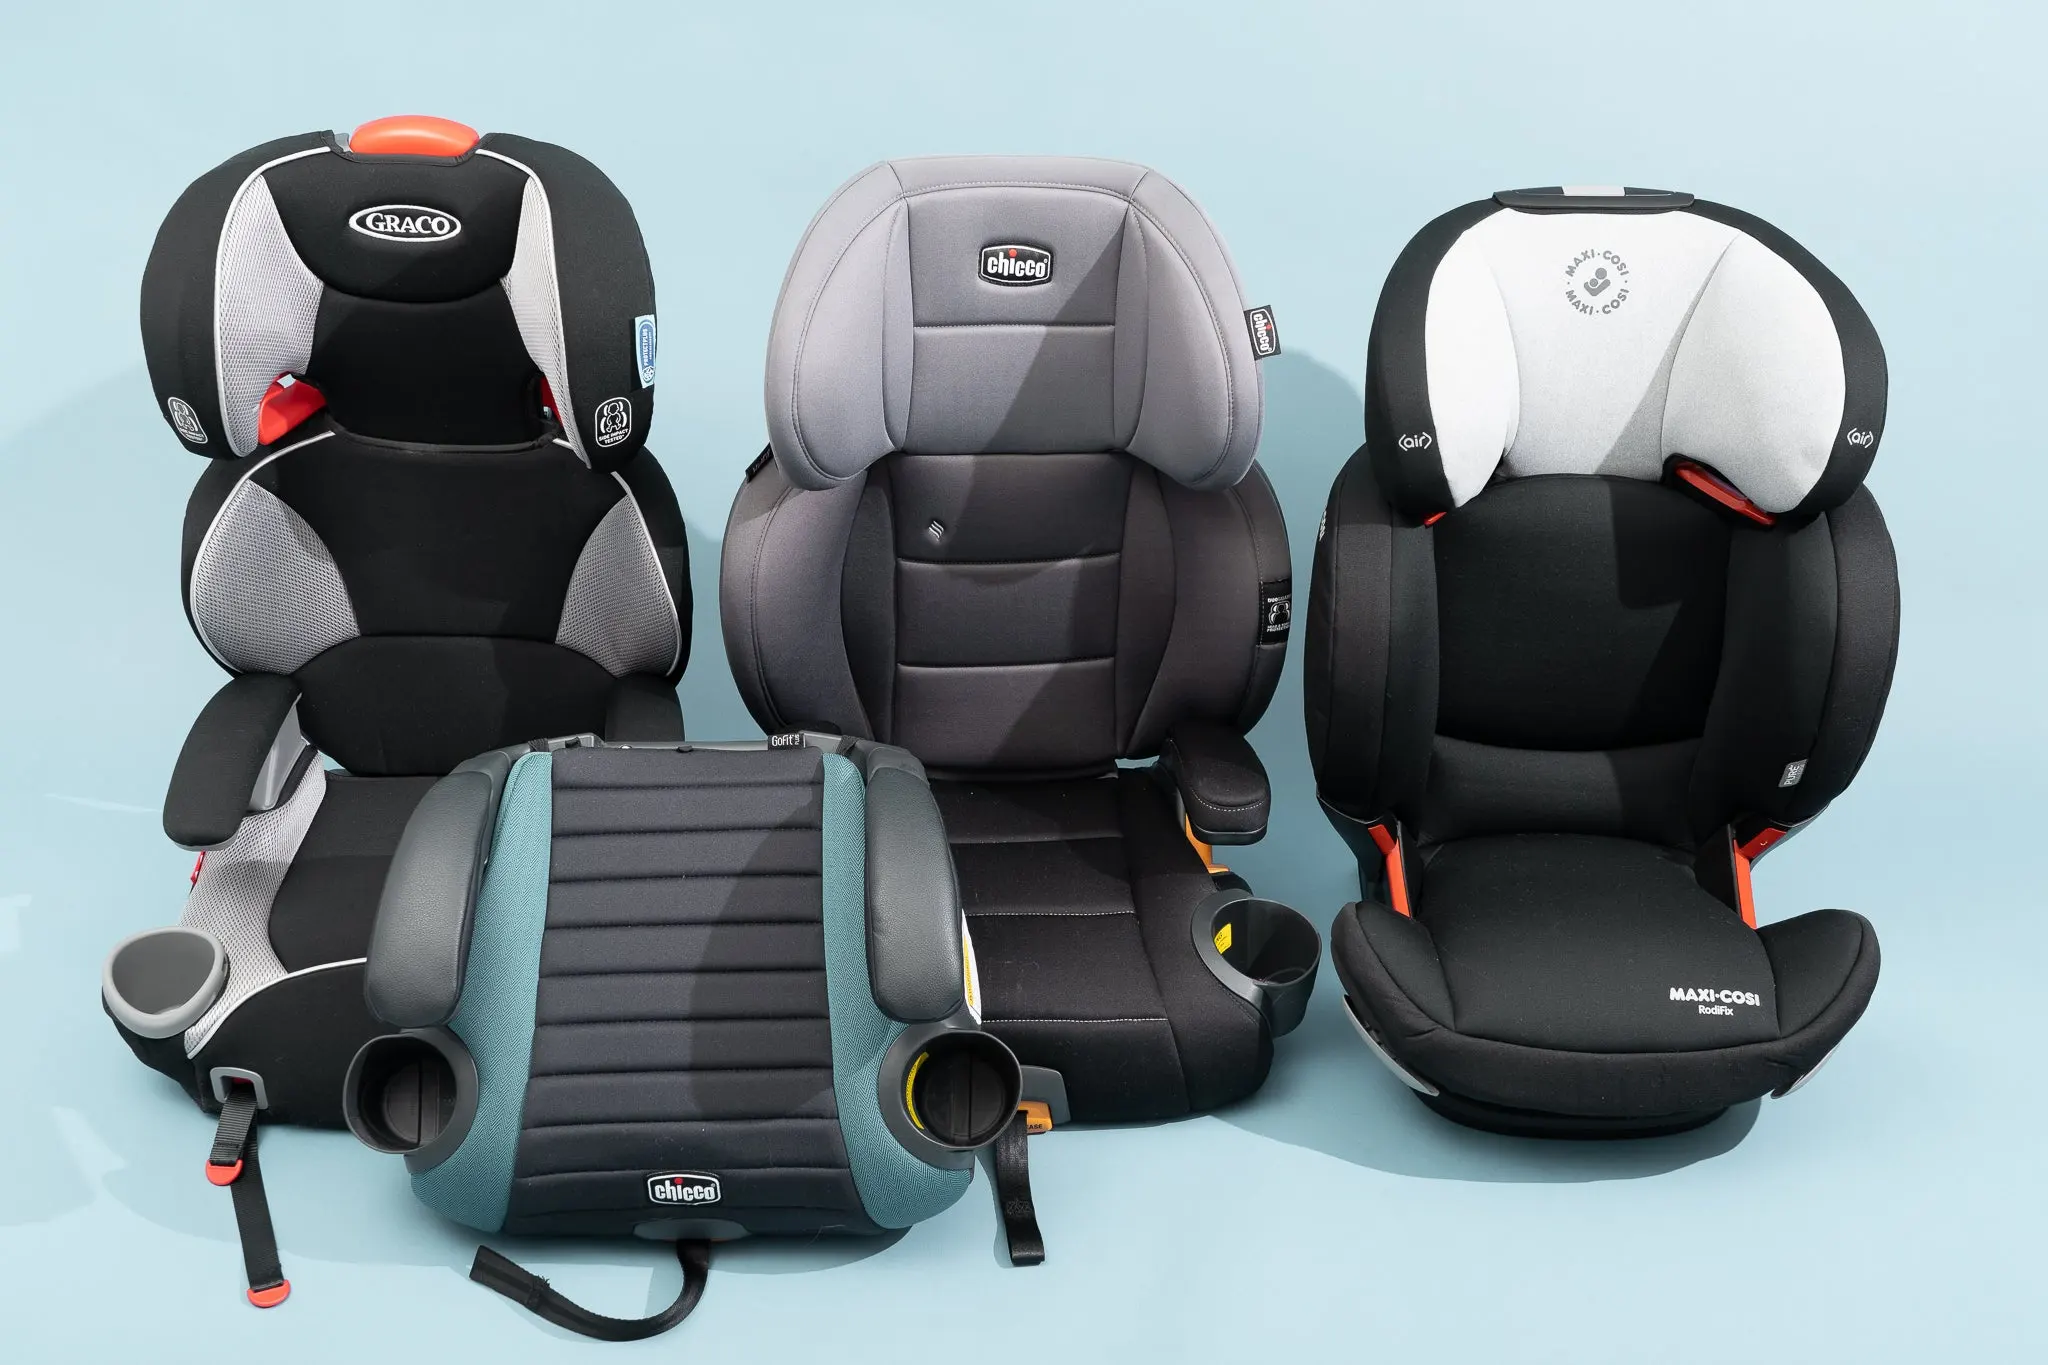 Which Booster Seat Is Best?